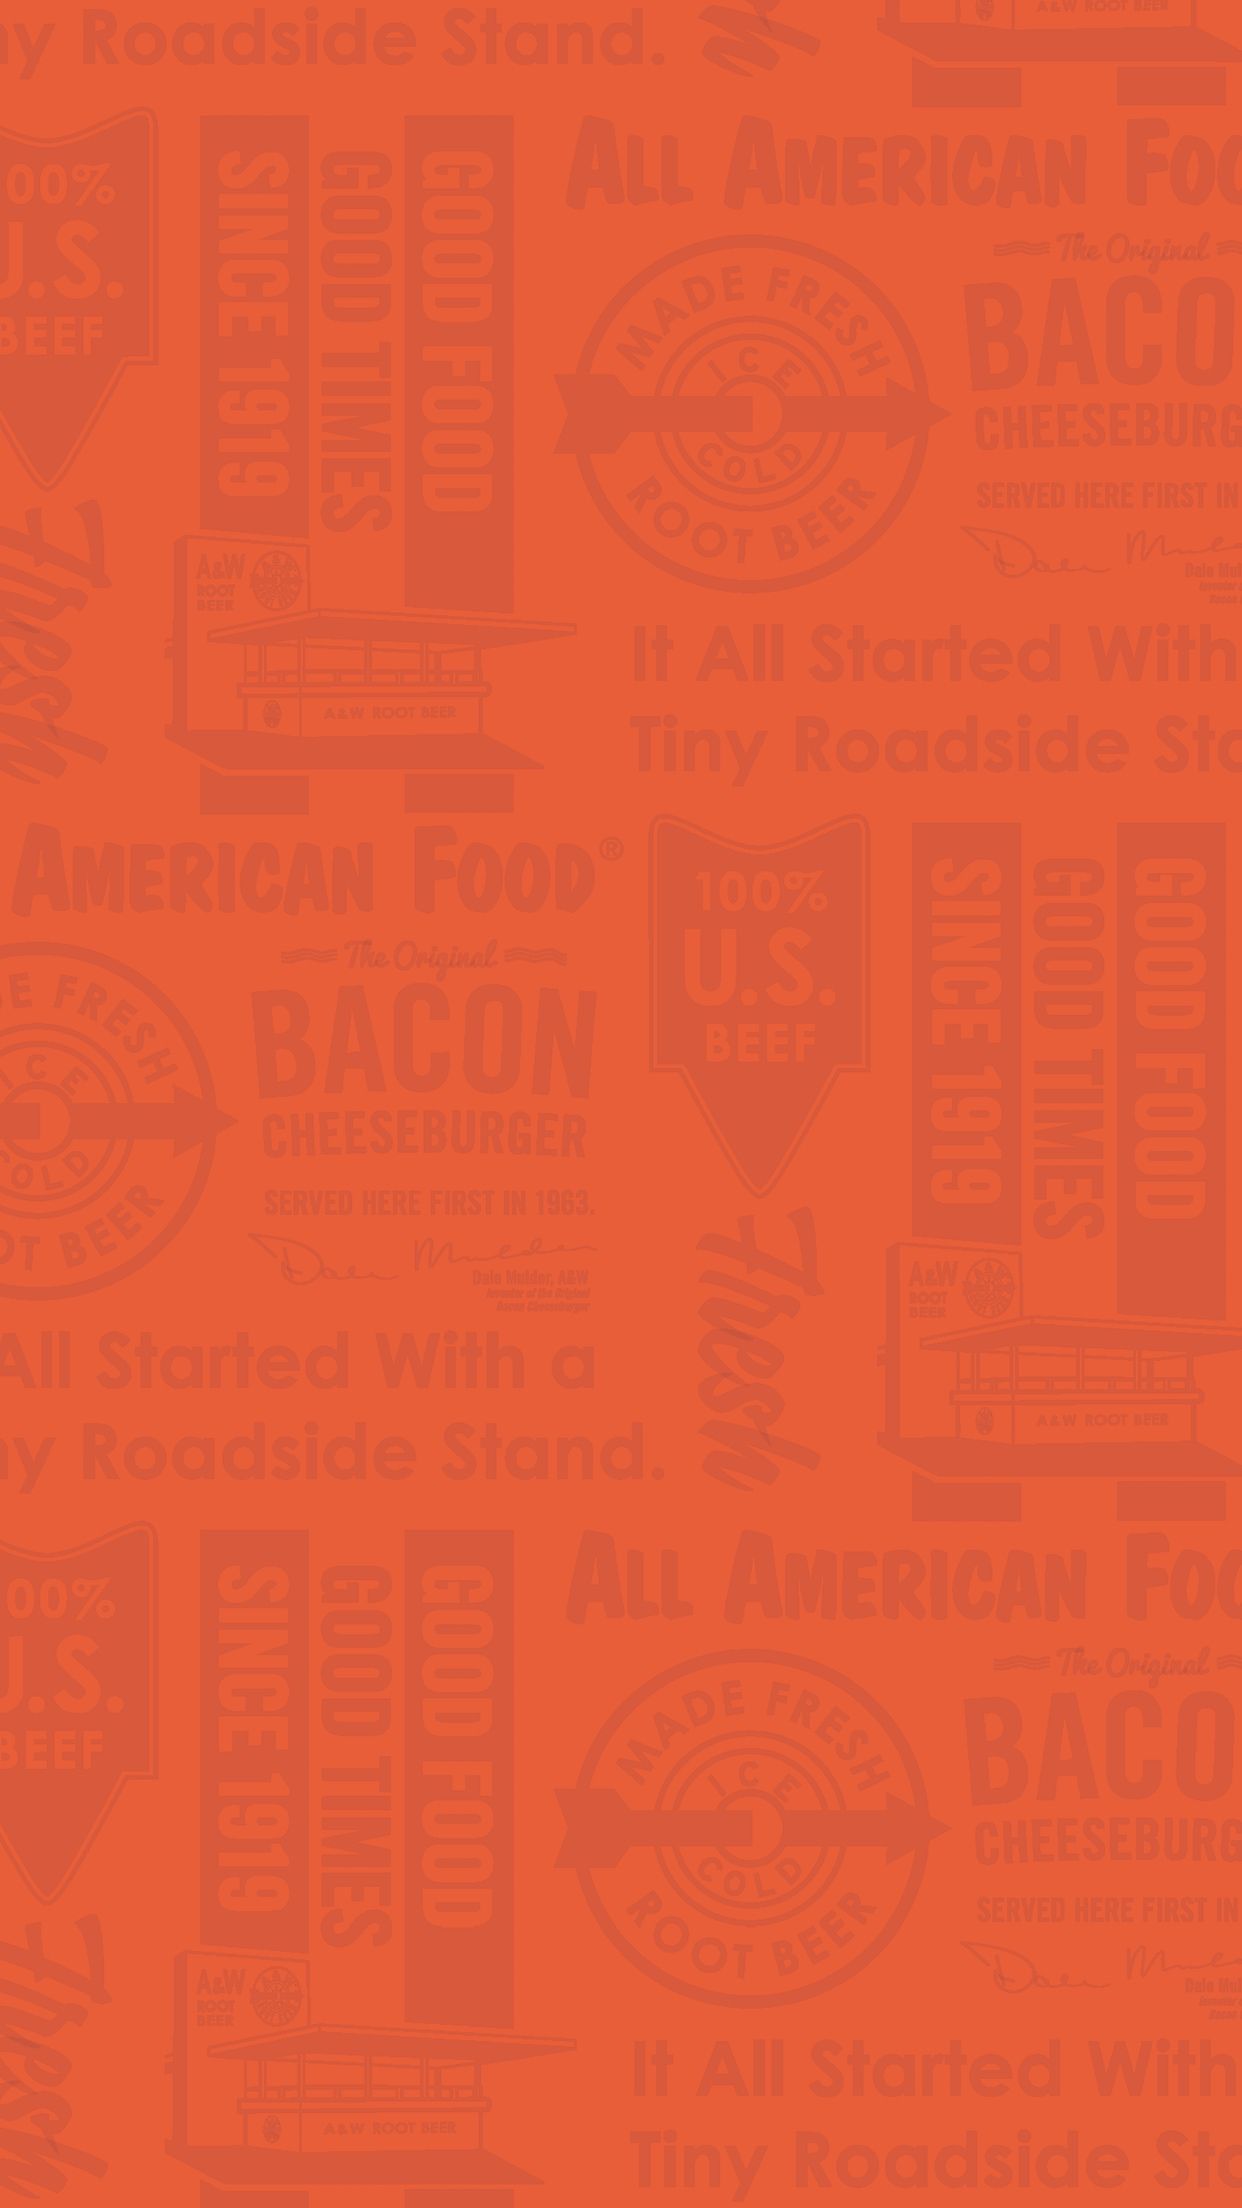 Celebrate 100 Years of A&W with New Phone Wallpaper!. A&W